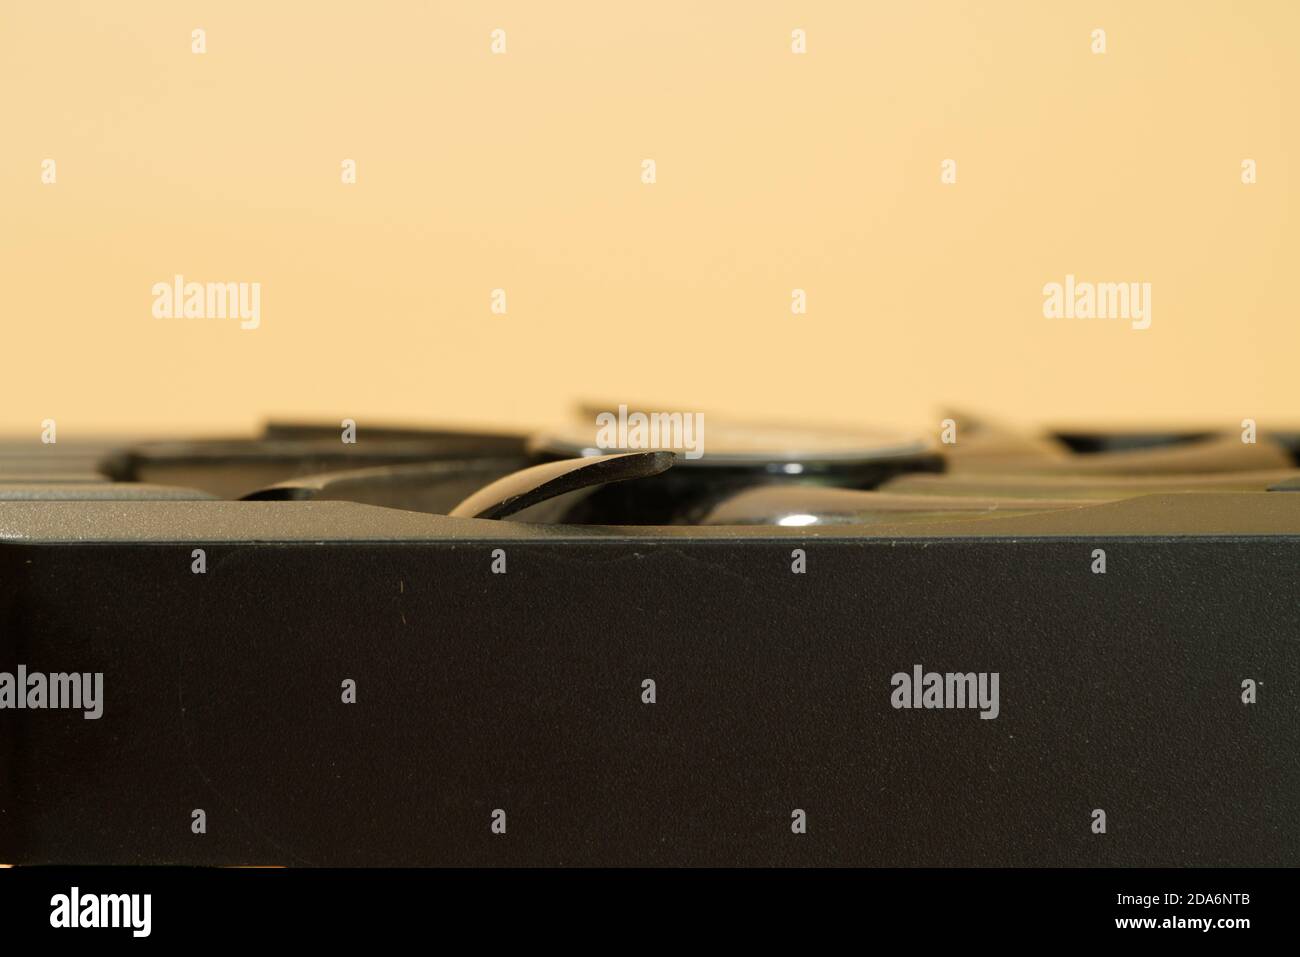 side view of video card with cooler on peach colored background Stock Photo